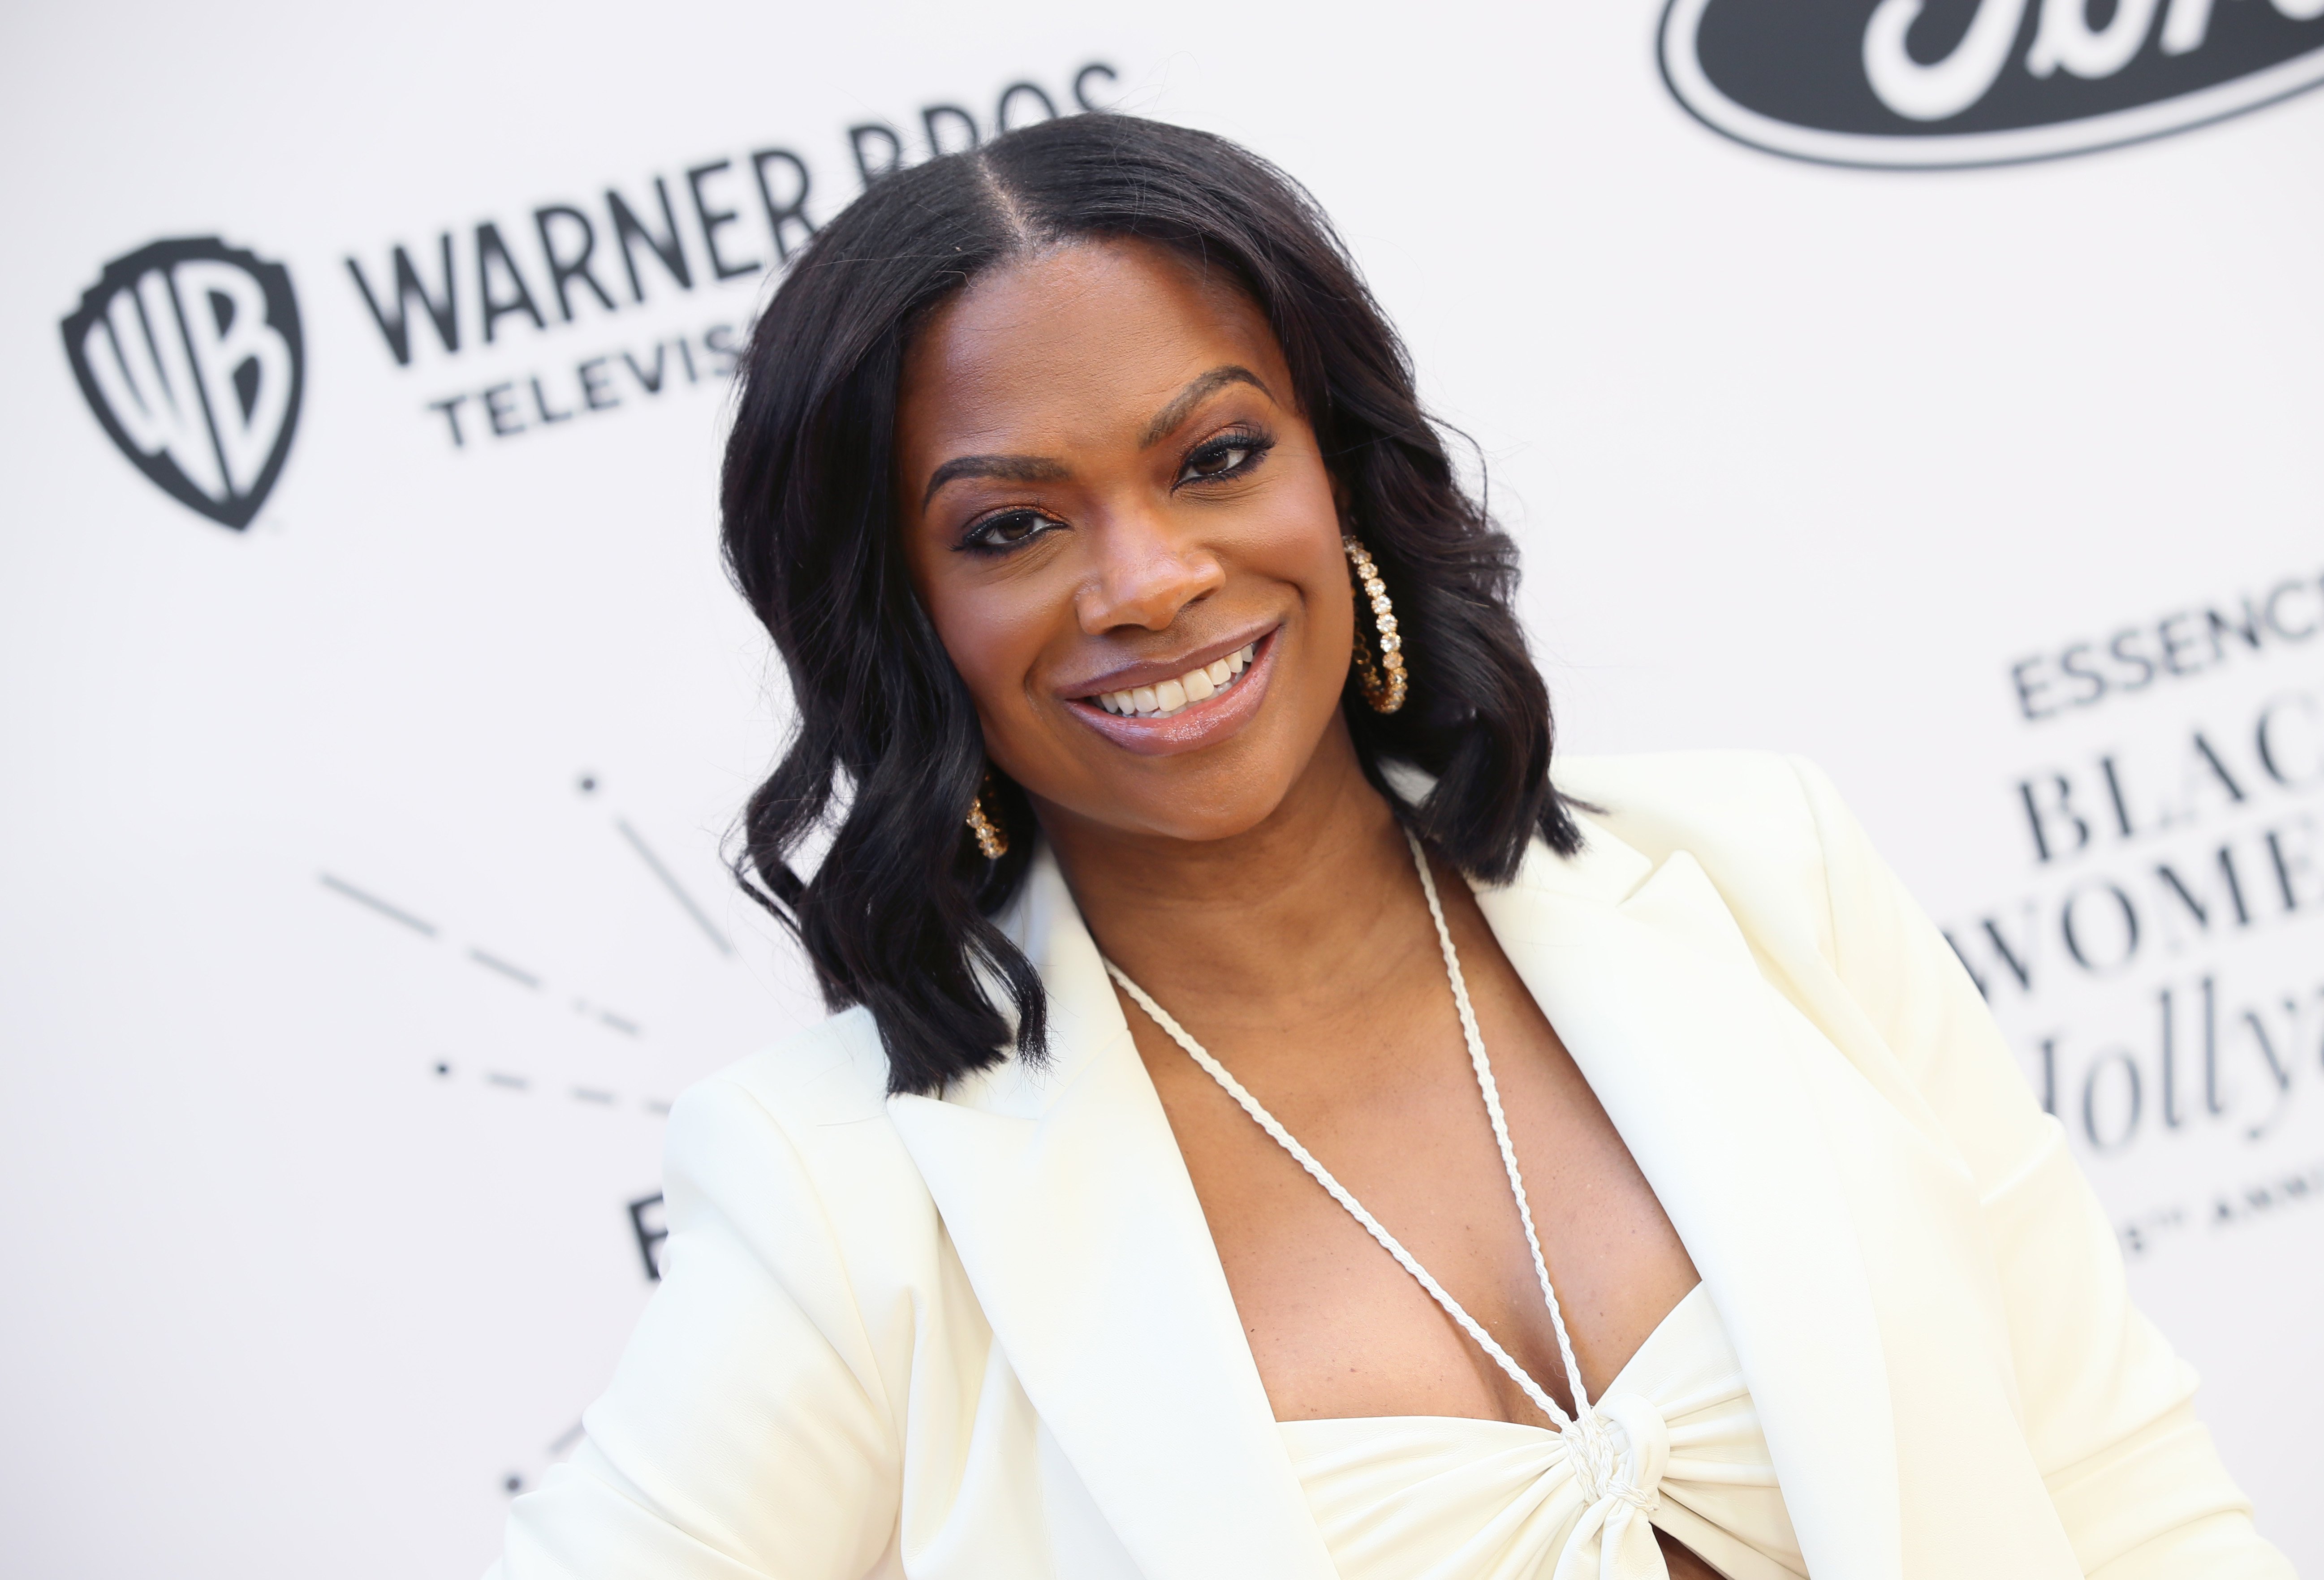 Kandi Burruss smiling at the ESSENCE 15th Anniversary Black Women In Hollywood Awards